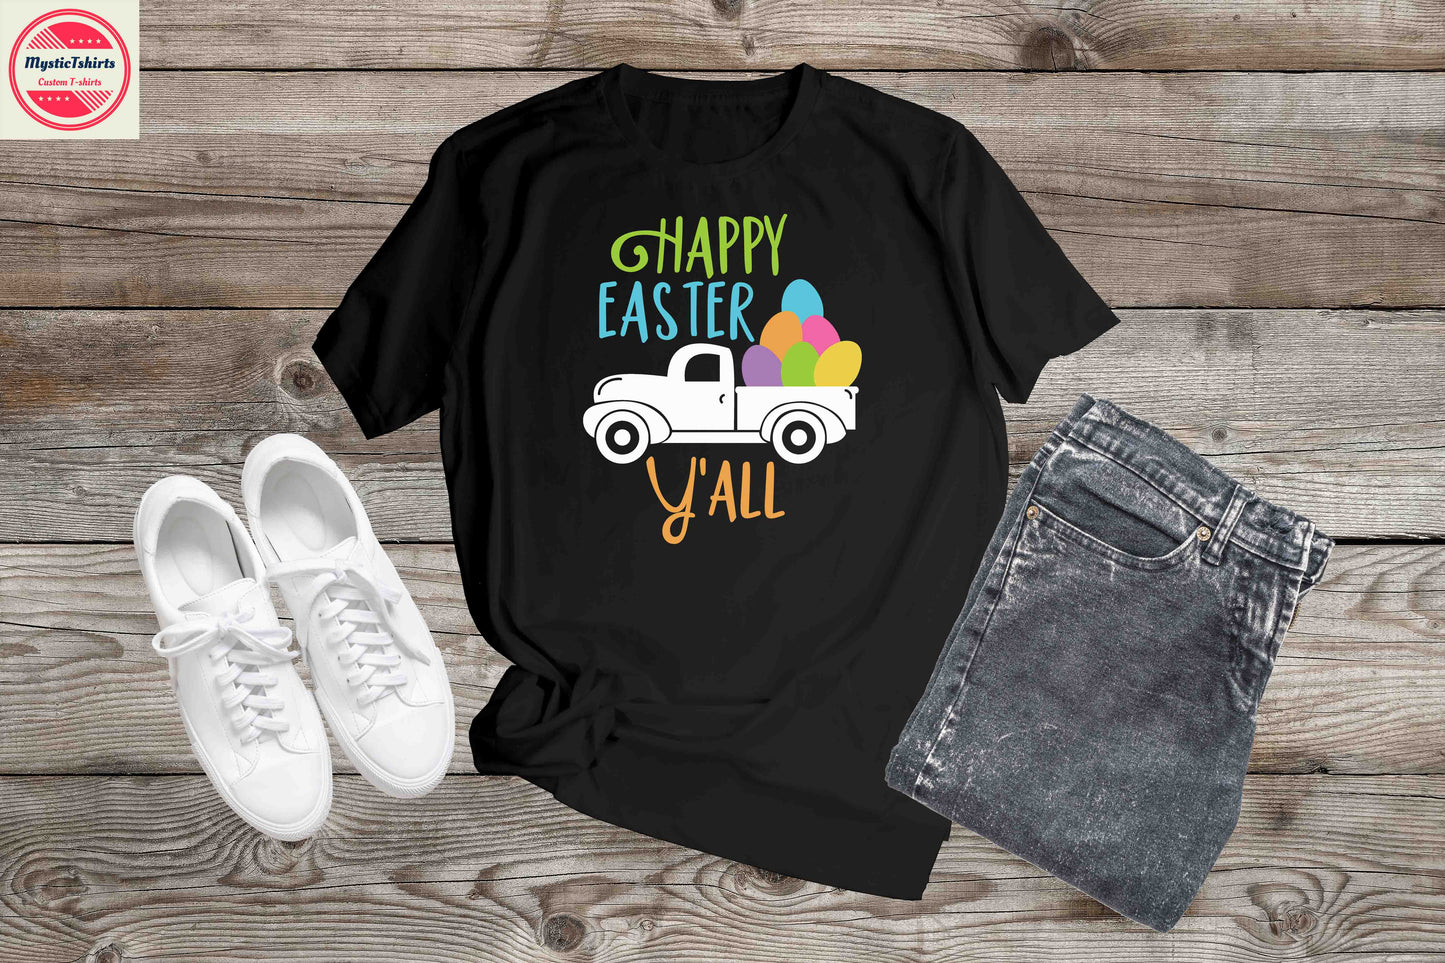 182. HAPPY EASTER Y'ALL, Custom Made Shirt, Personalized T-Shirt, Custom Text, Make Your Own Shirt, Custom Tee